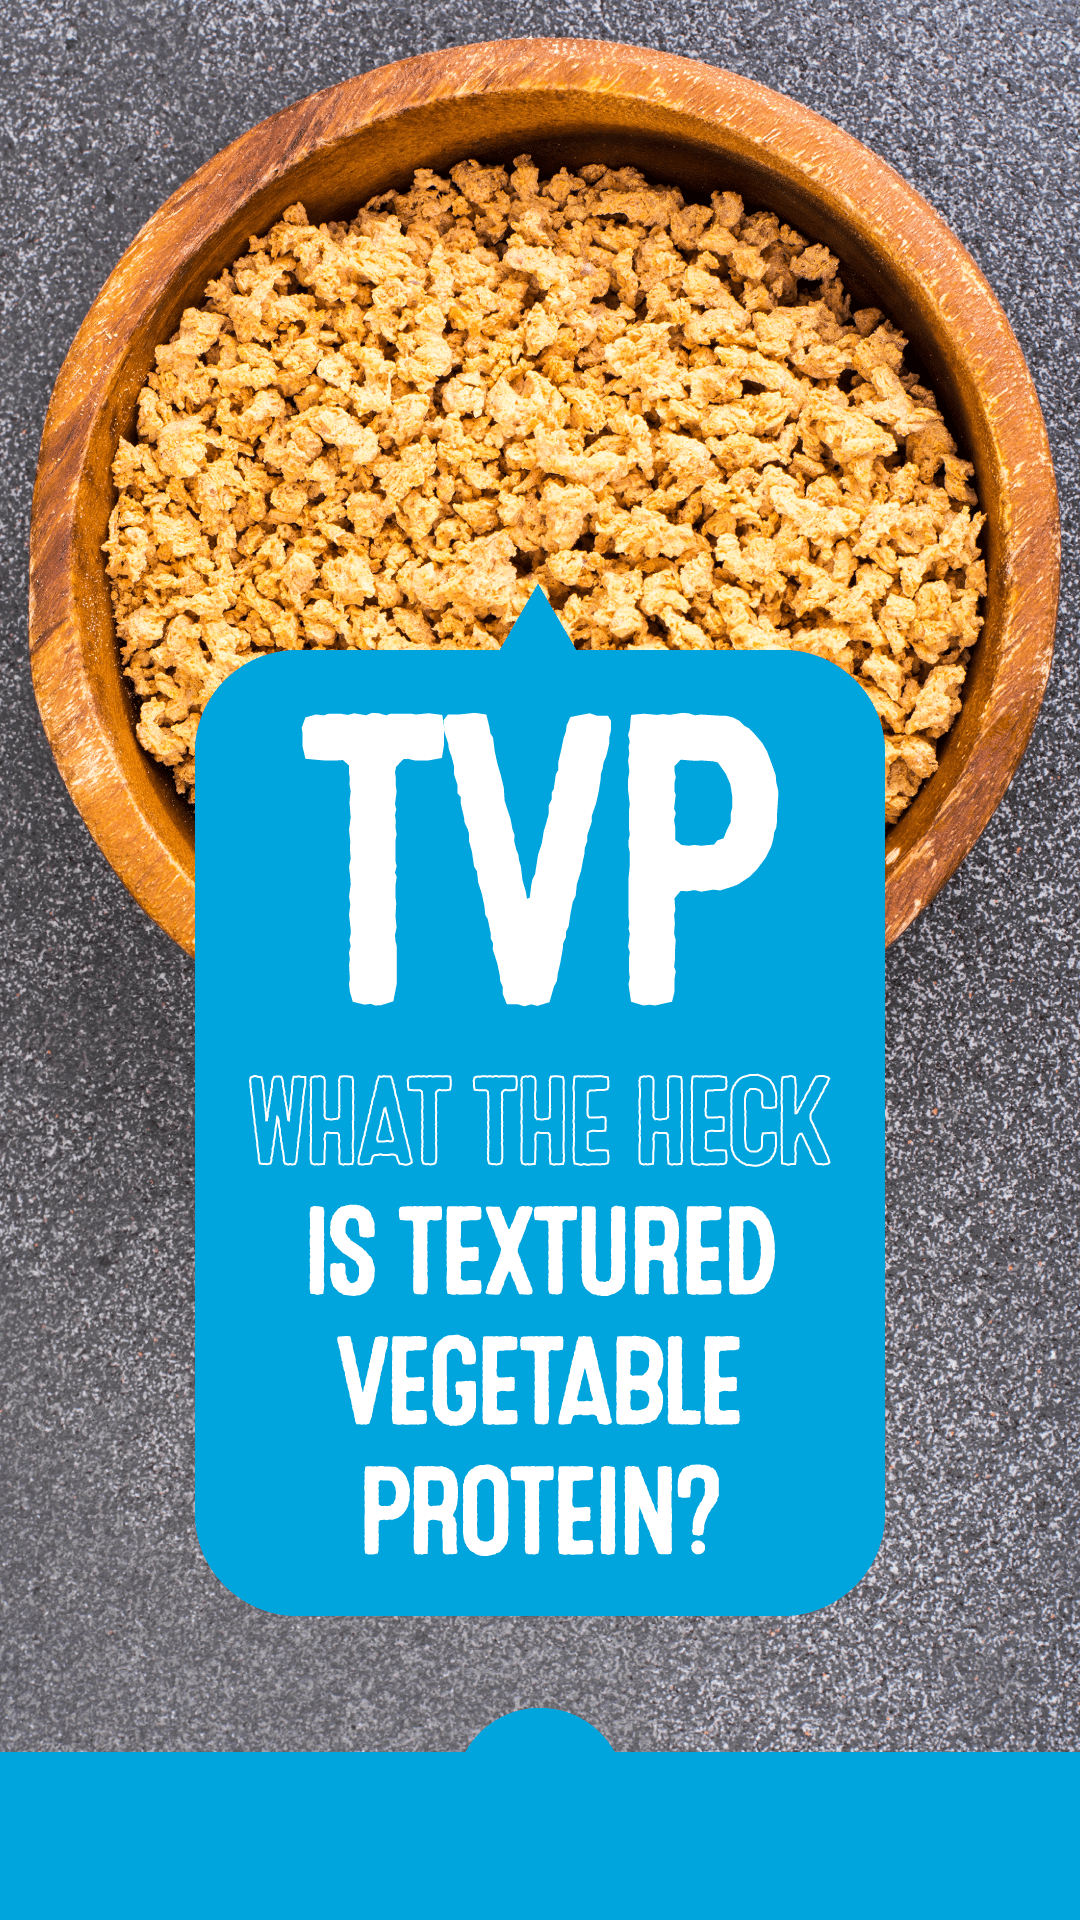 What the Heck Is Textured Vegetable Protein (TVP)?